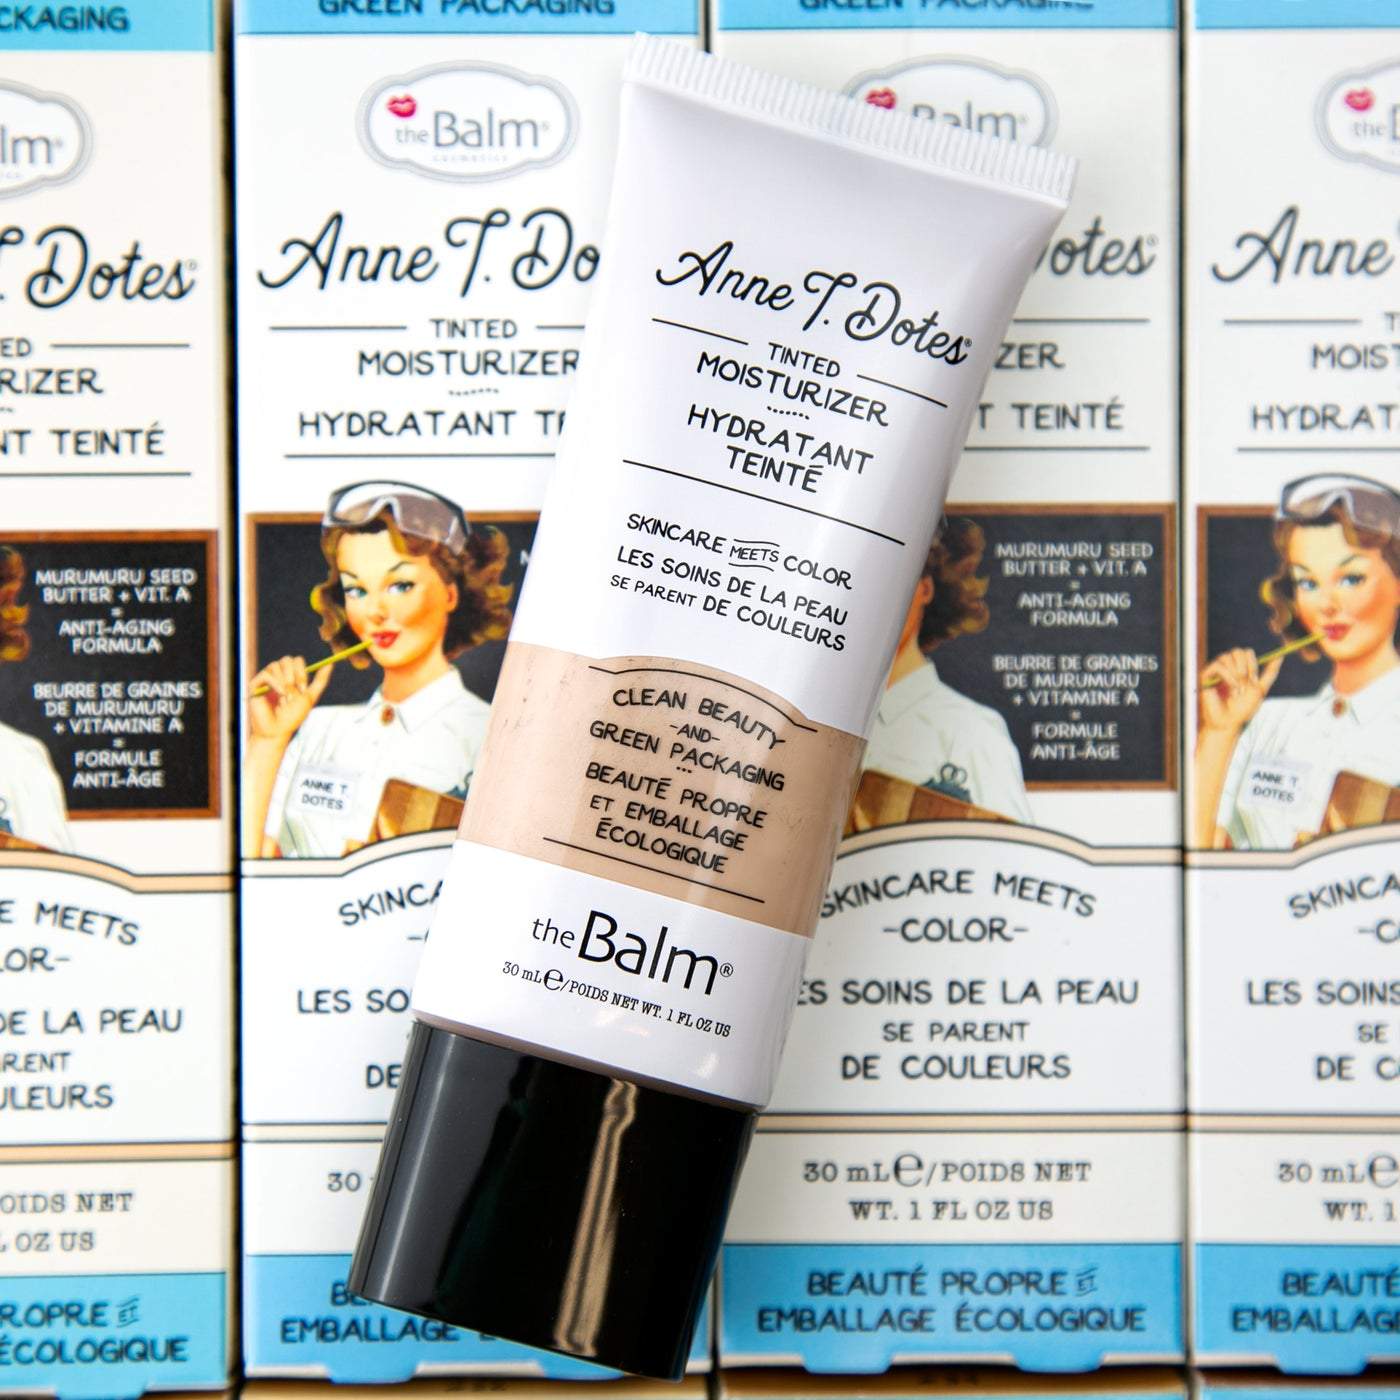 theBalm T. Dote – and Body Shoppe